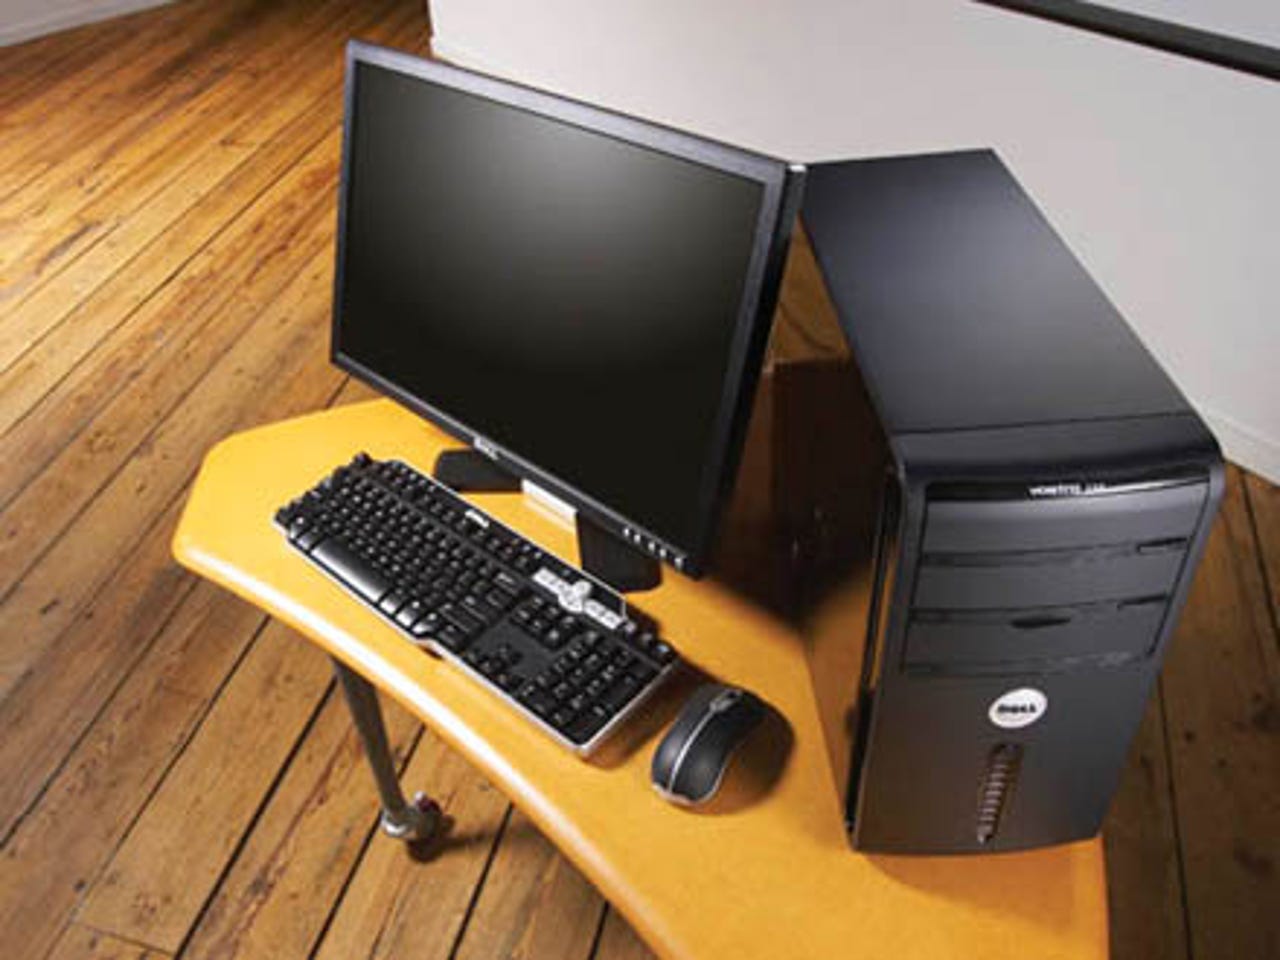 photos-dell-launches-vostro-range-for-small-business4.jpg